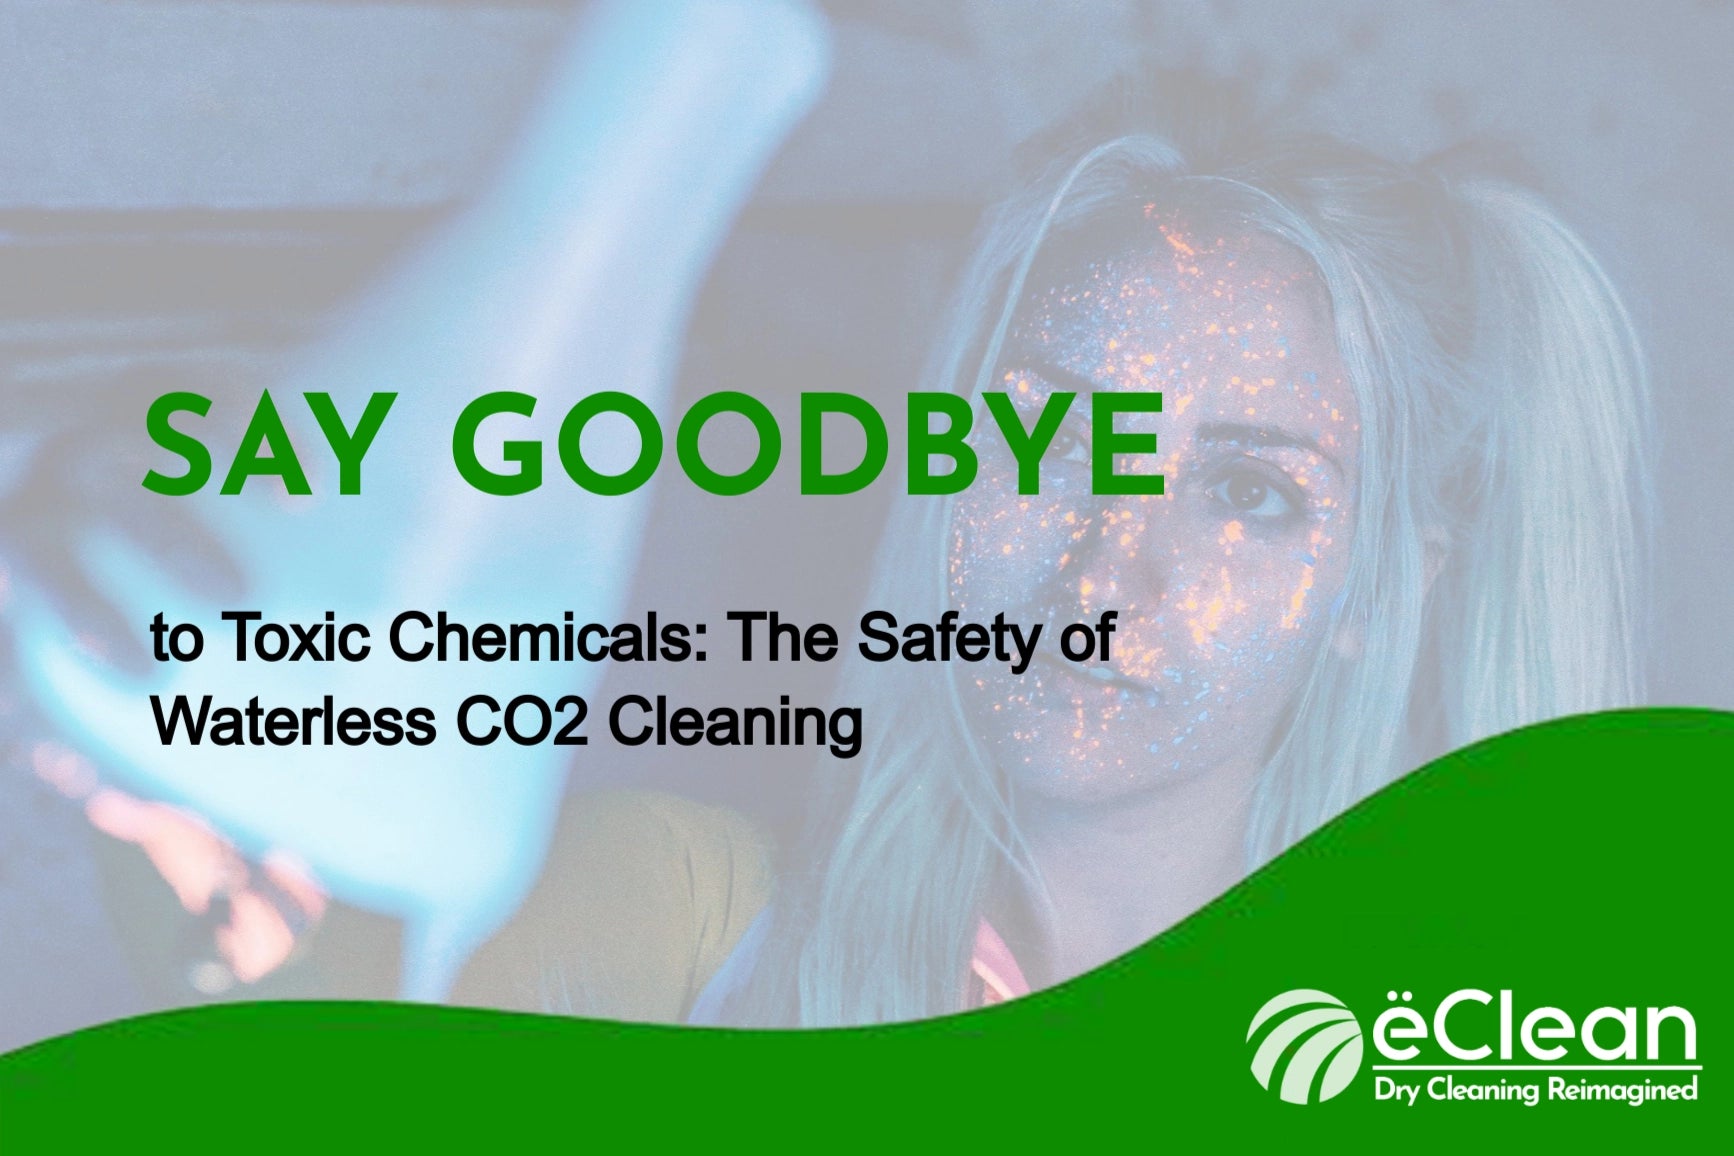 Say Goodbye to Toxic Chemicals: The Safety of Waterless CO2 Cleaning